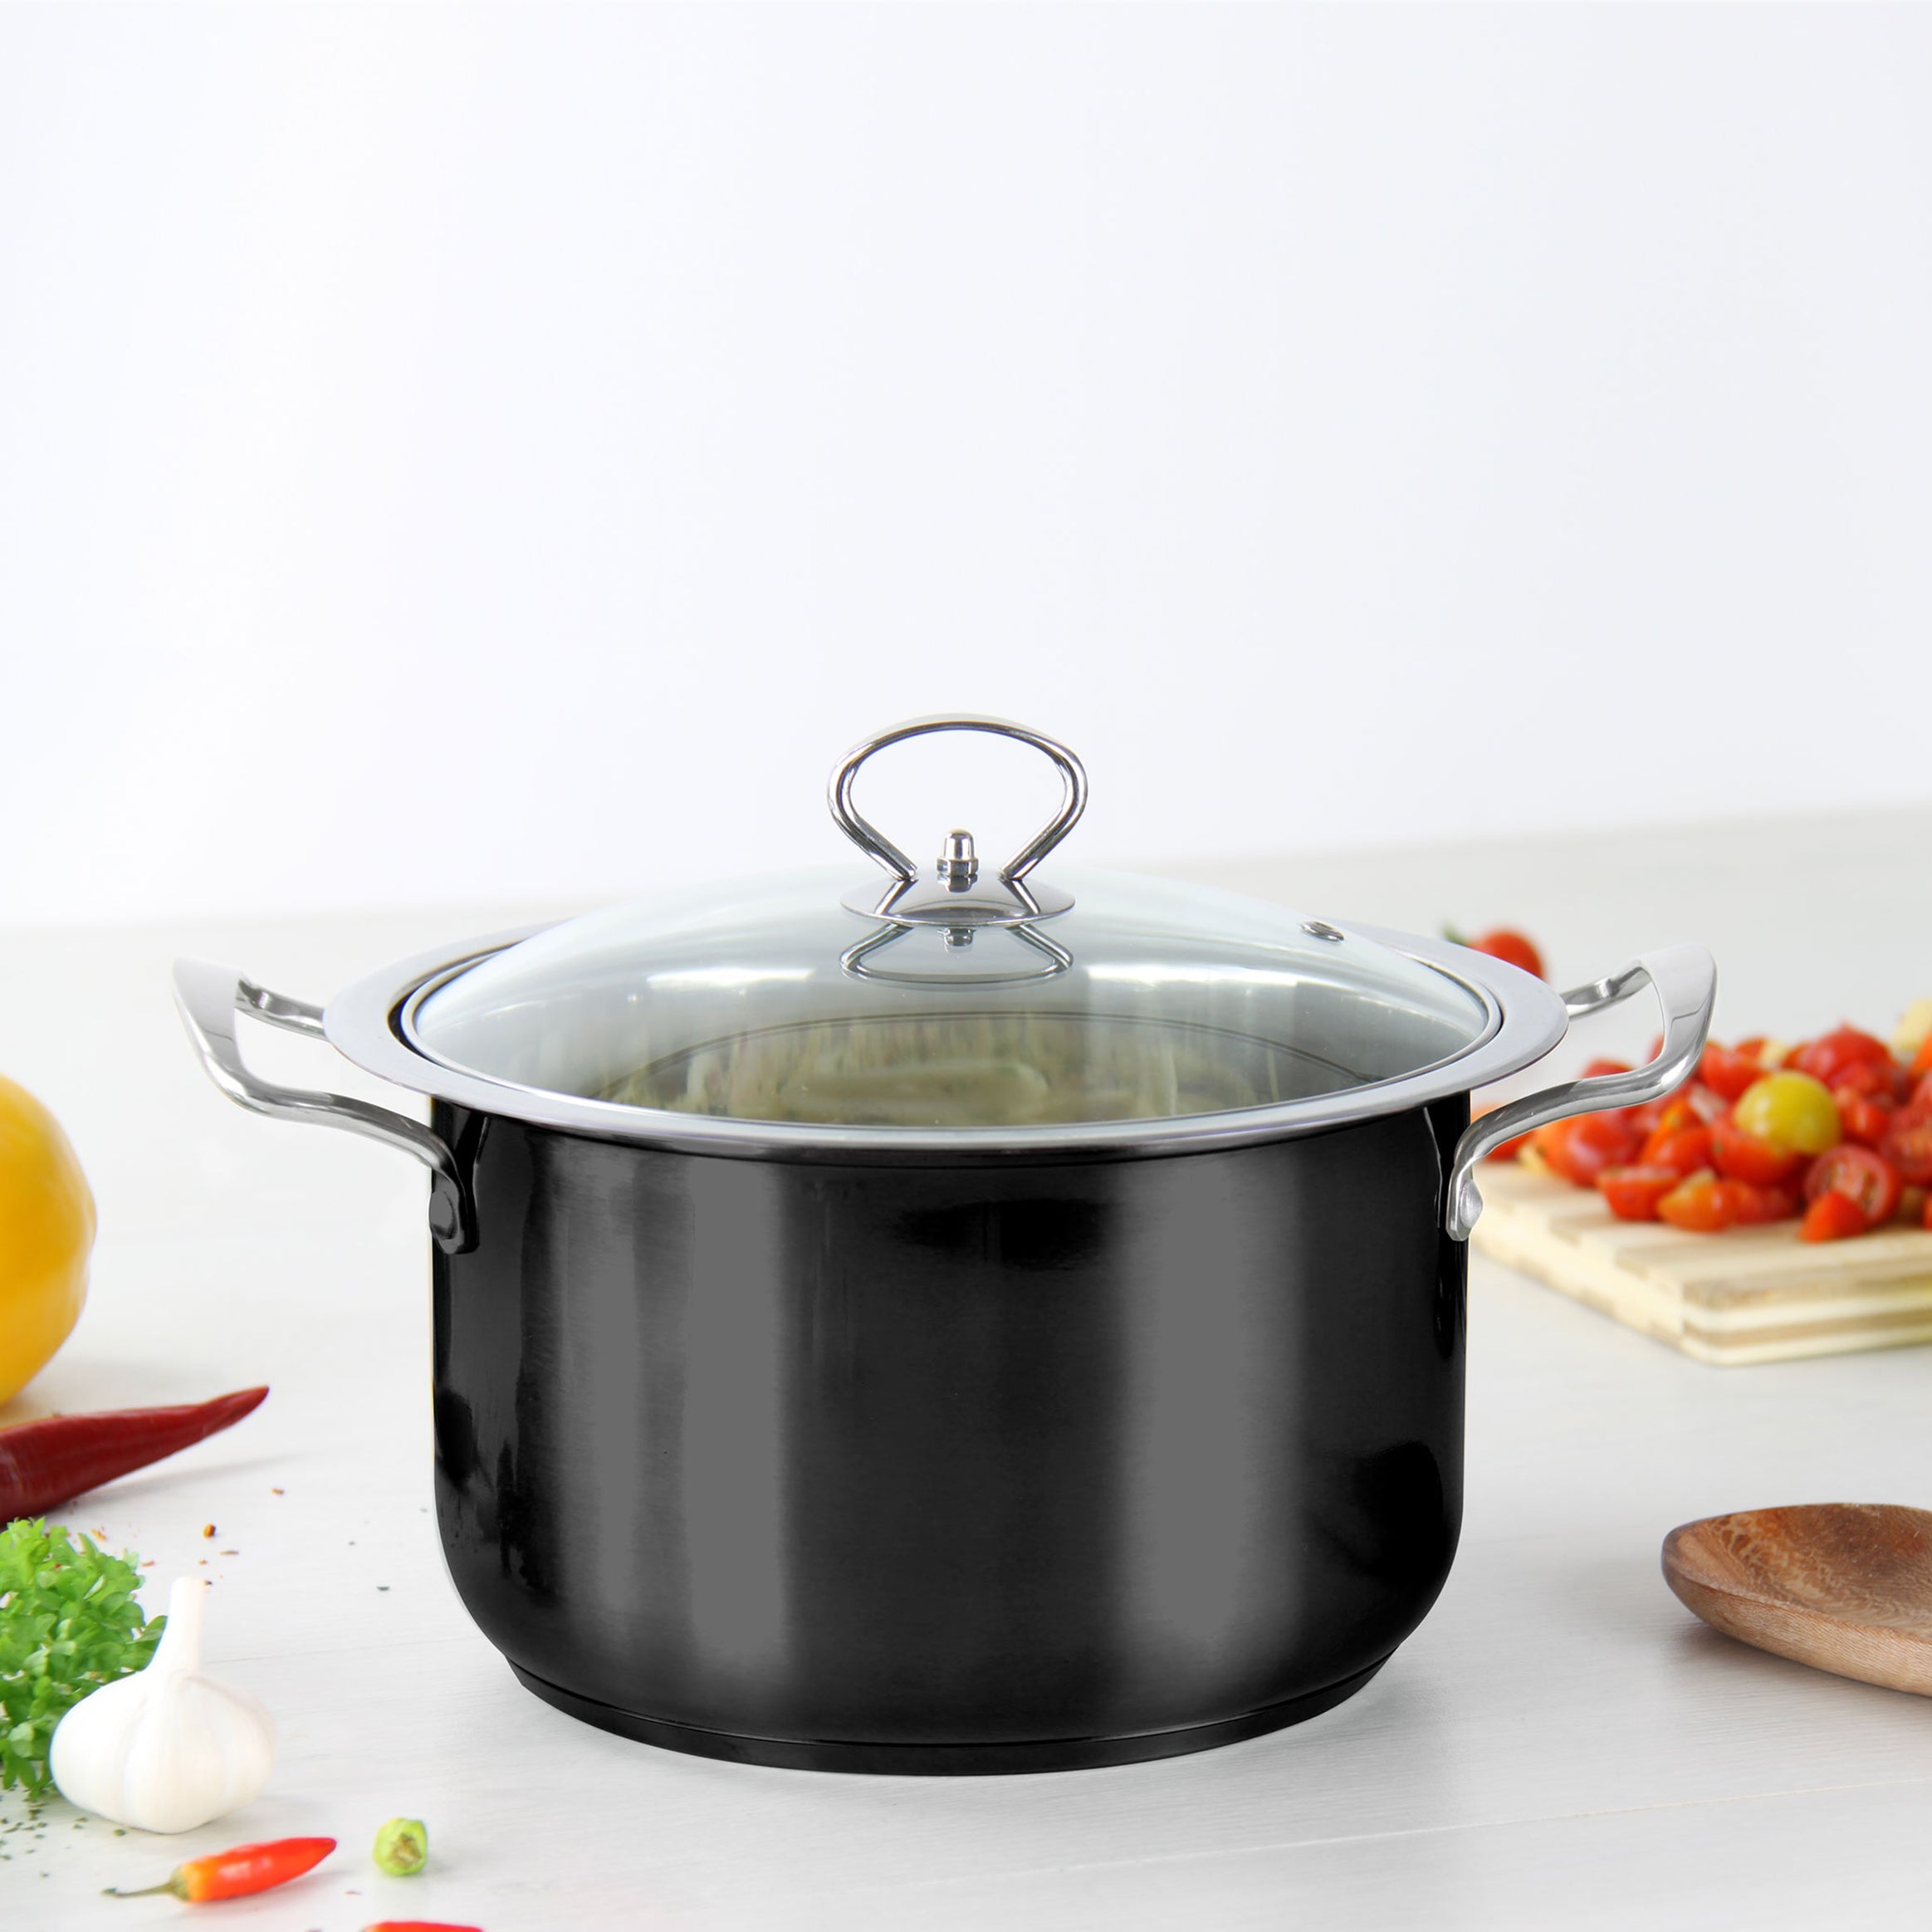 Stainless Steel Stockpot - Induction Base - ONYX - 20cm